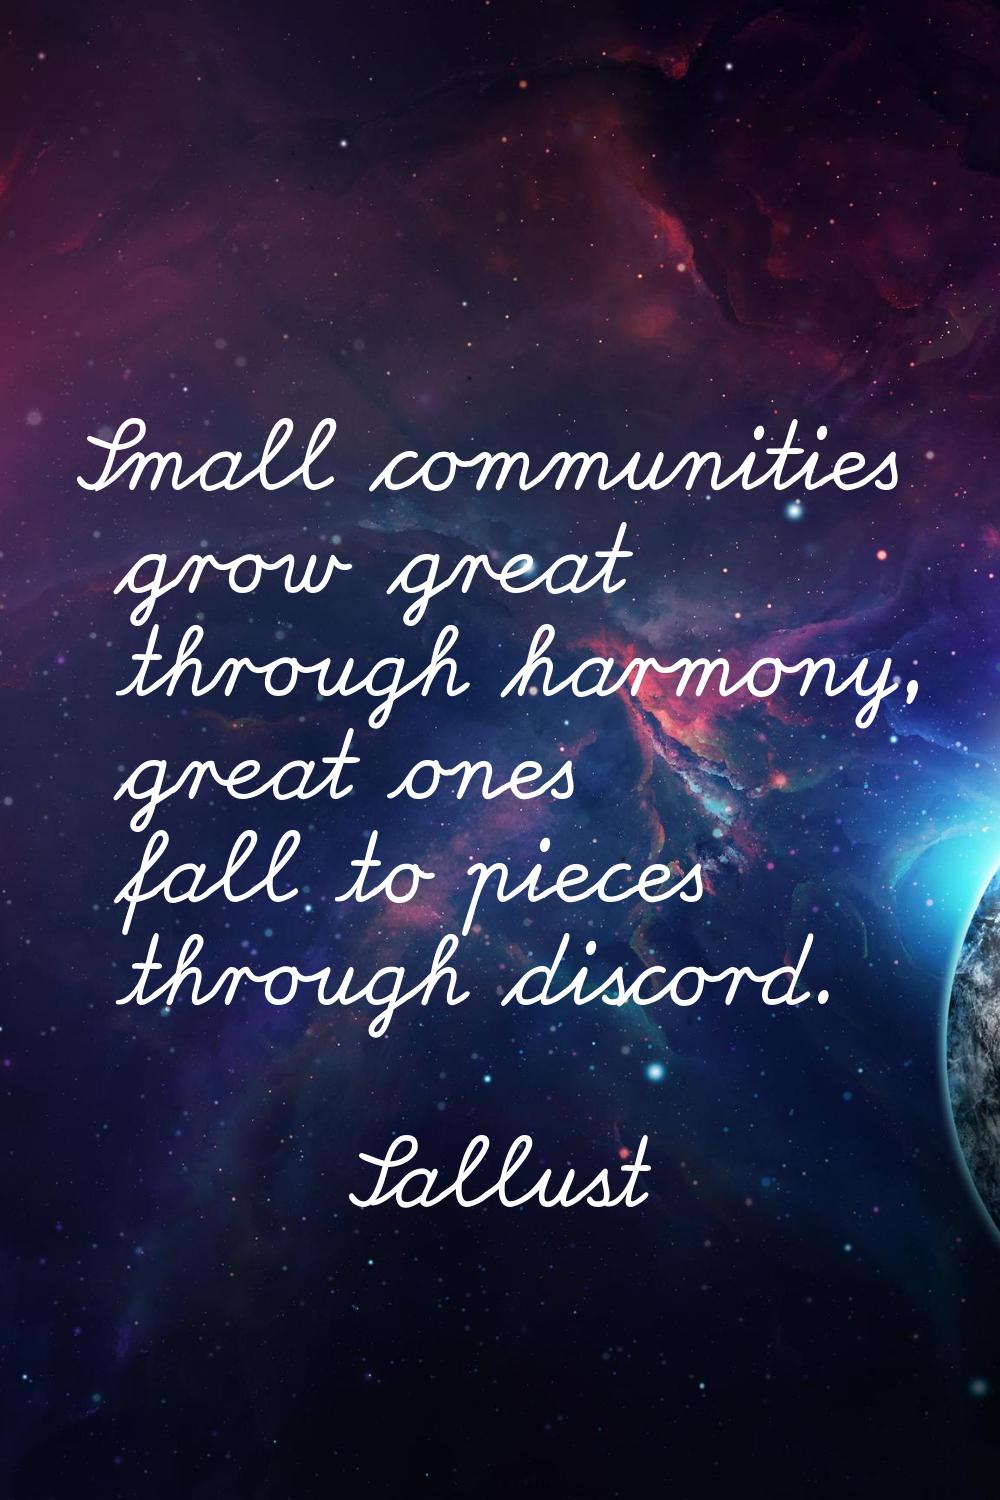 Small communities grow great through harmony, great ones fall to pieces through discord.